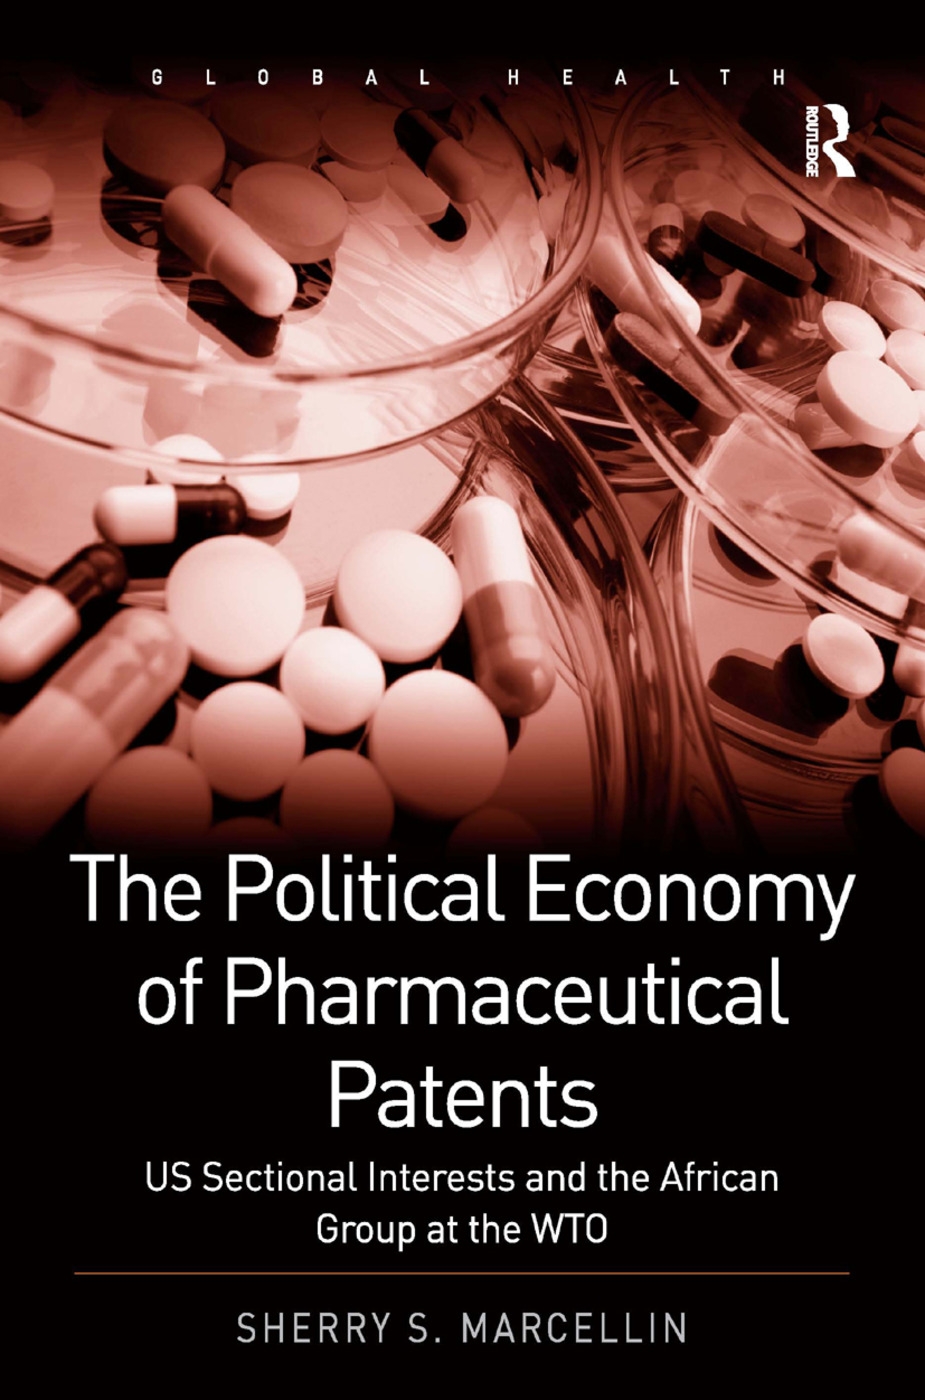 The Political Economy of Pharmaceutical Patents: Us Sectional Interests and the African Group at the Wto. Sherry Marcellin